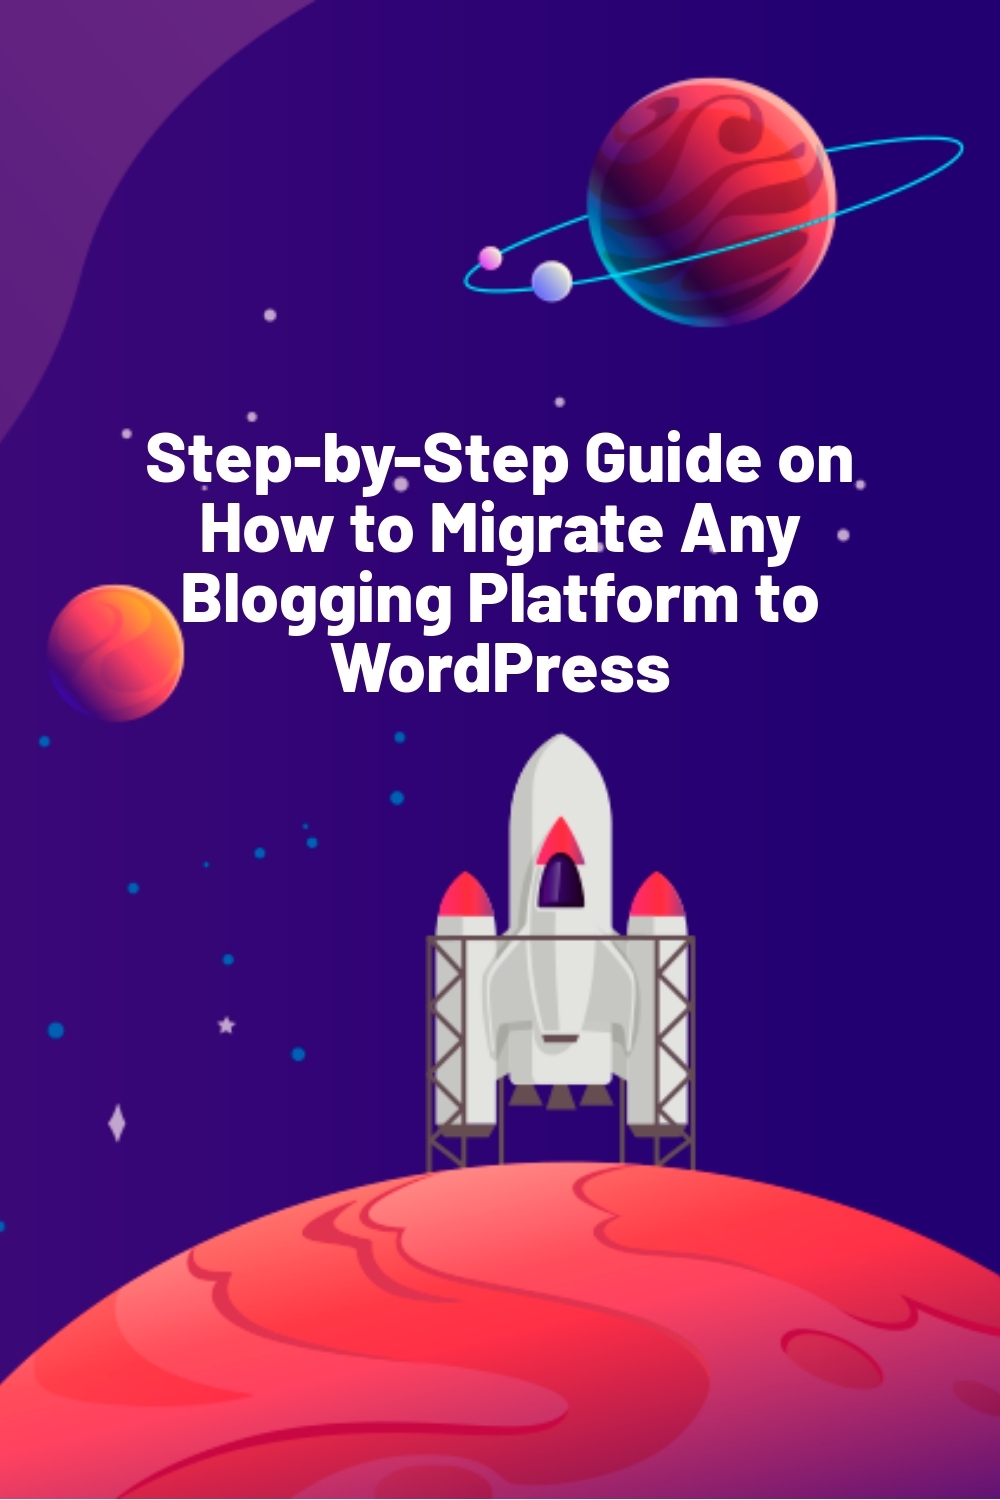 Step-by-Step Guide on How to Migrate Any Blogging Platform to WordPress